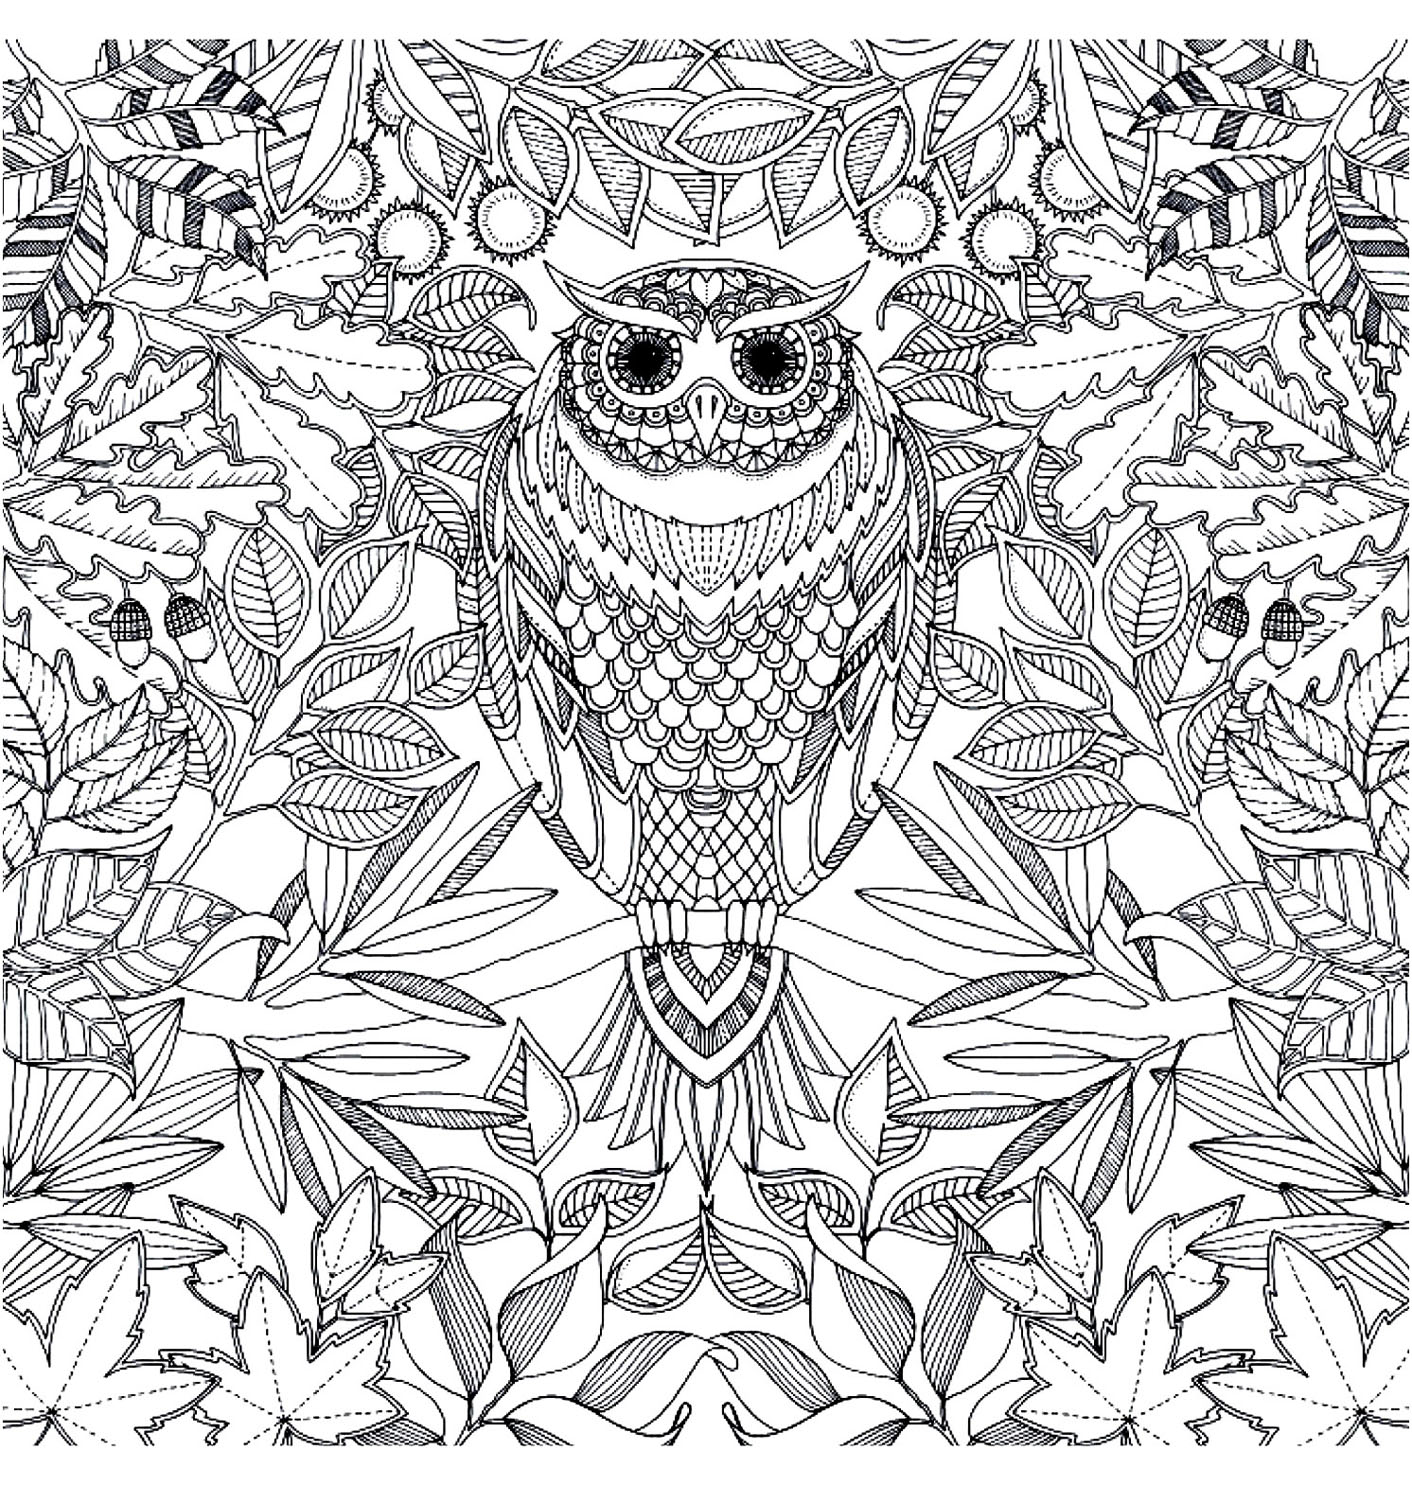 Owl with piercing look to print and color many plant elements in the background